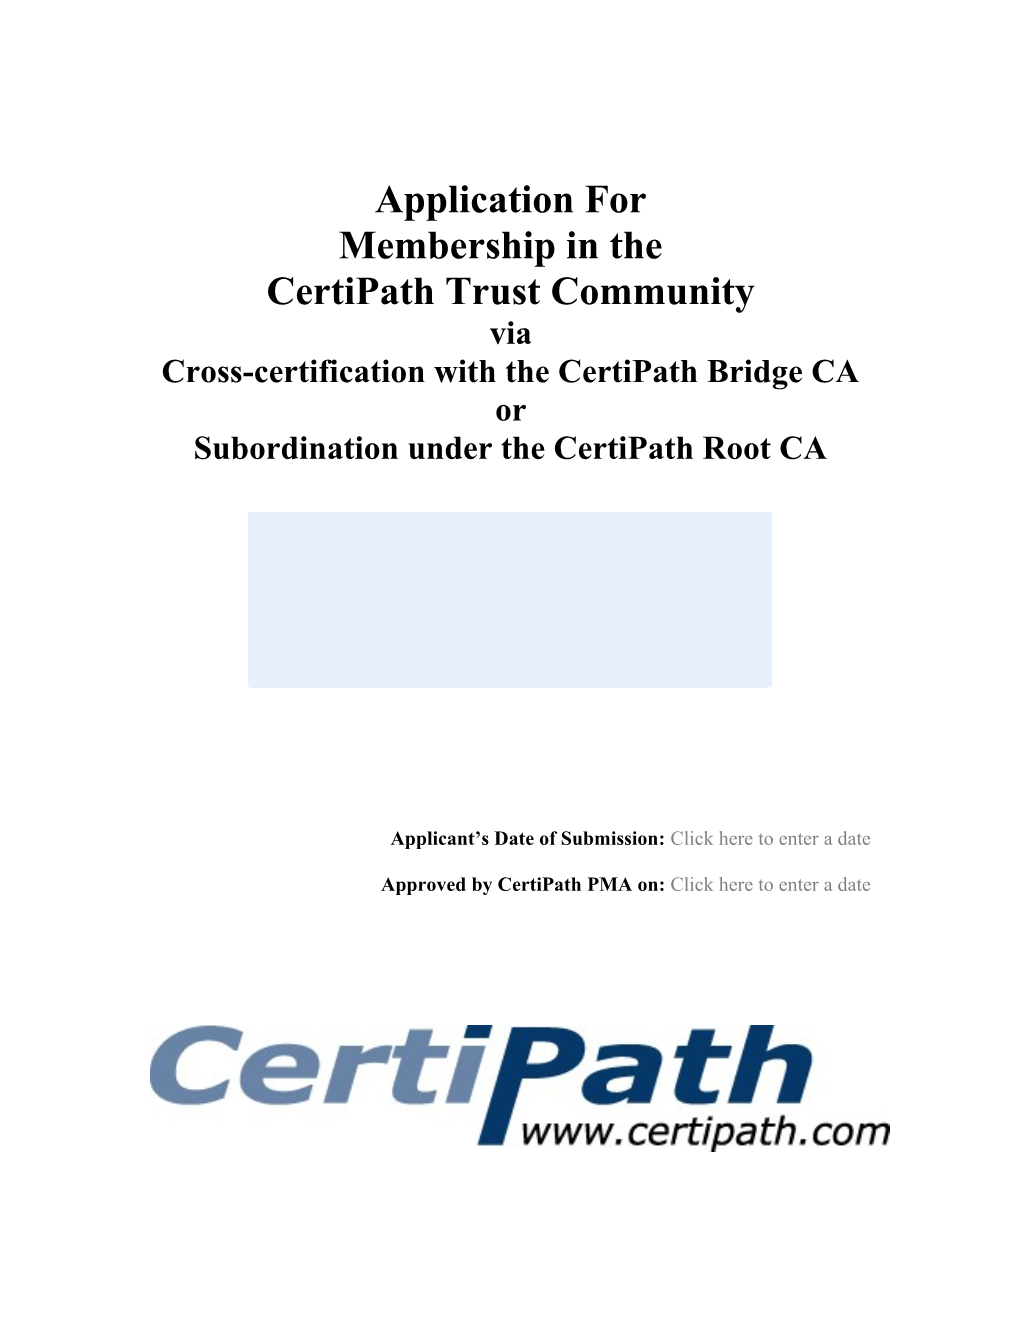 Cross-Certification with the Certipath Bridge CA Or